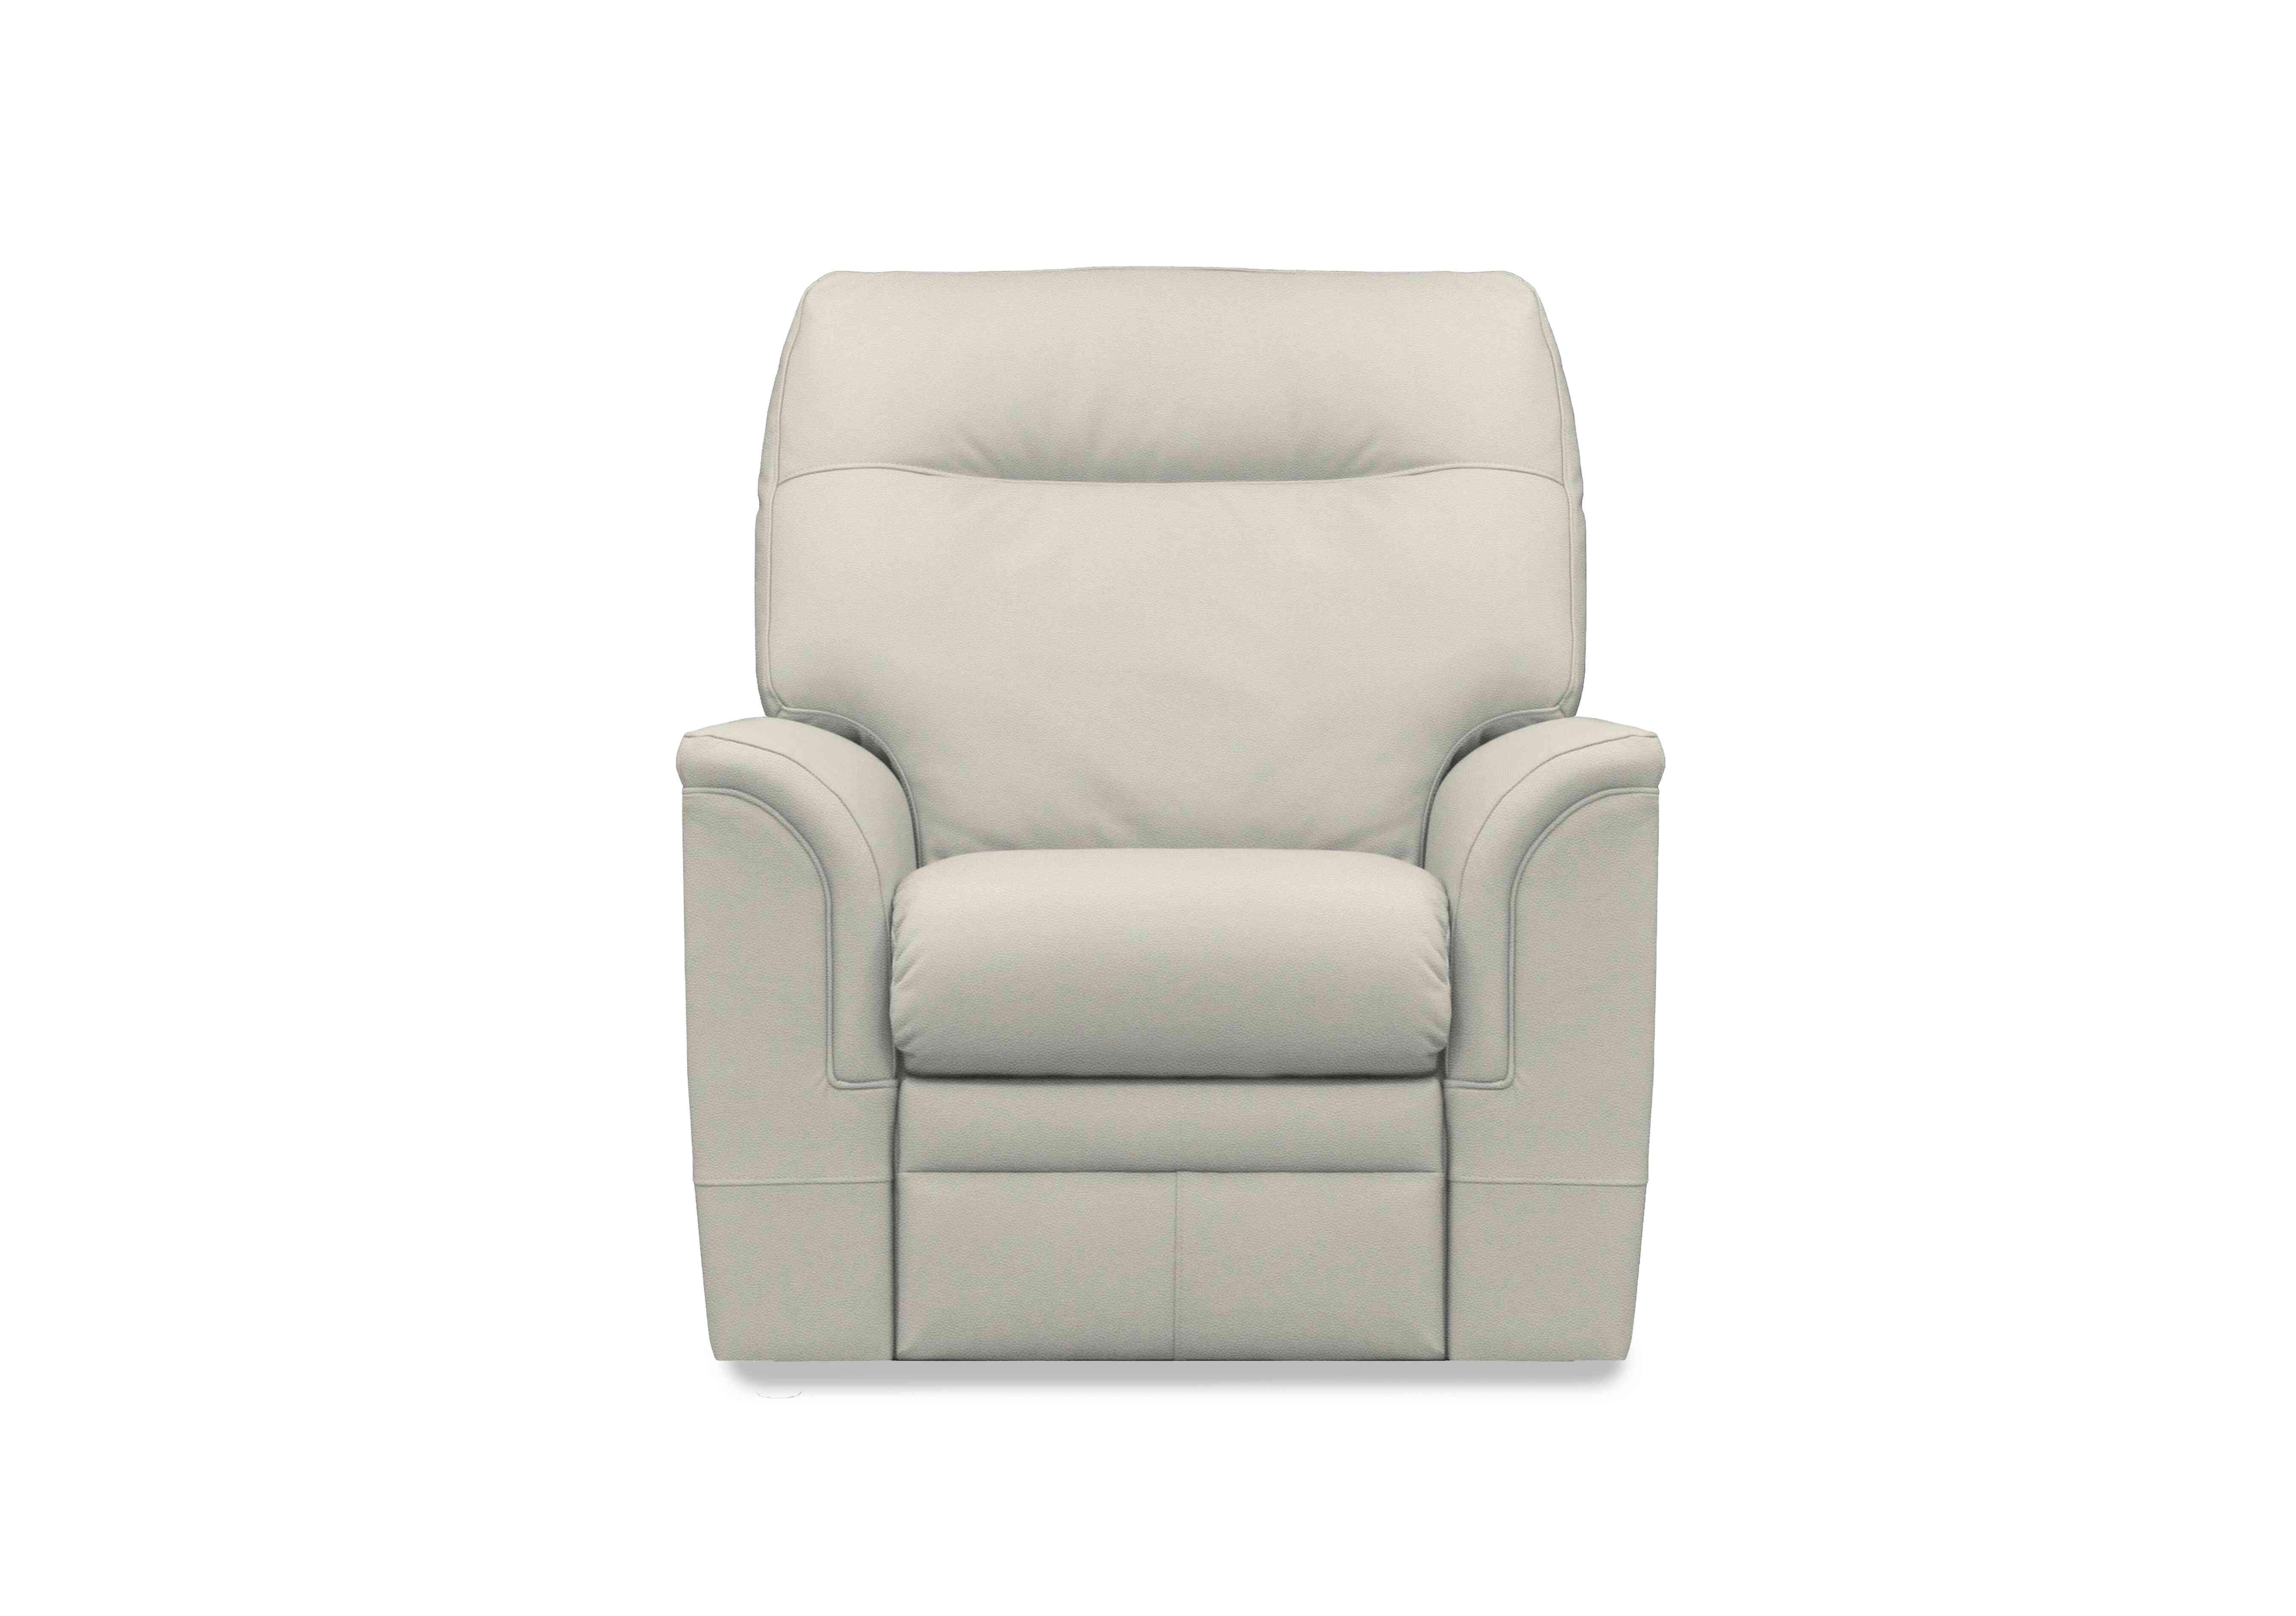 Hudson 23 Leather Lift and Rise Chair in Como Dove 0053051-0092 on Furniture Village